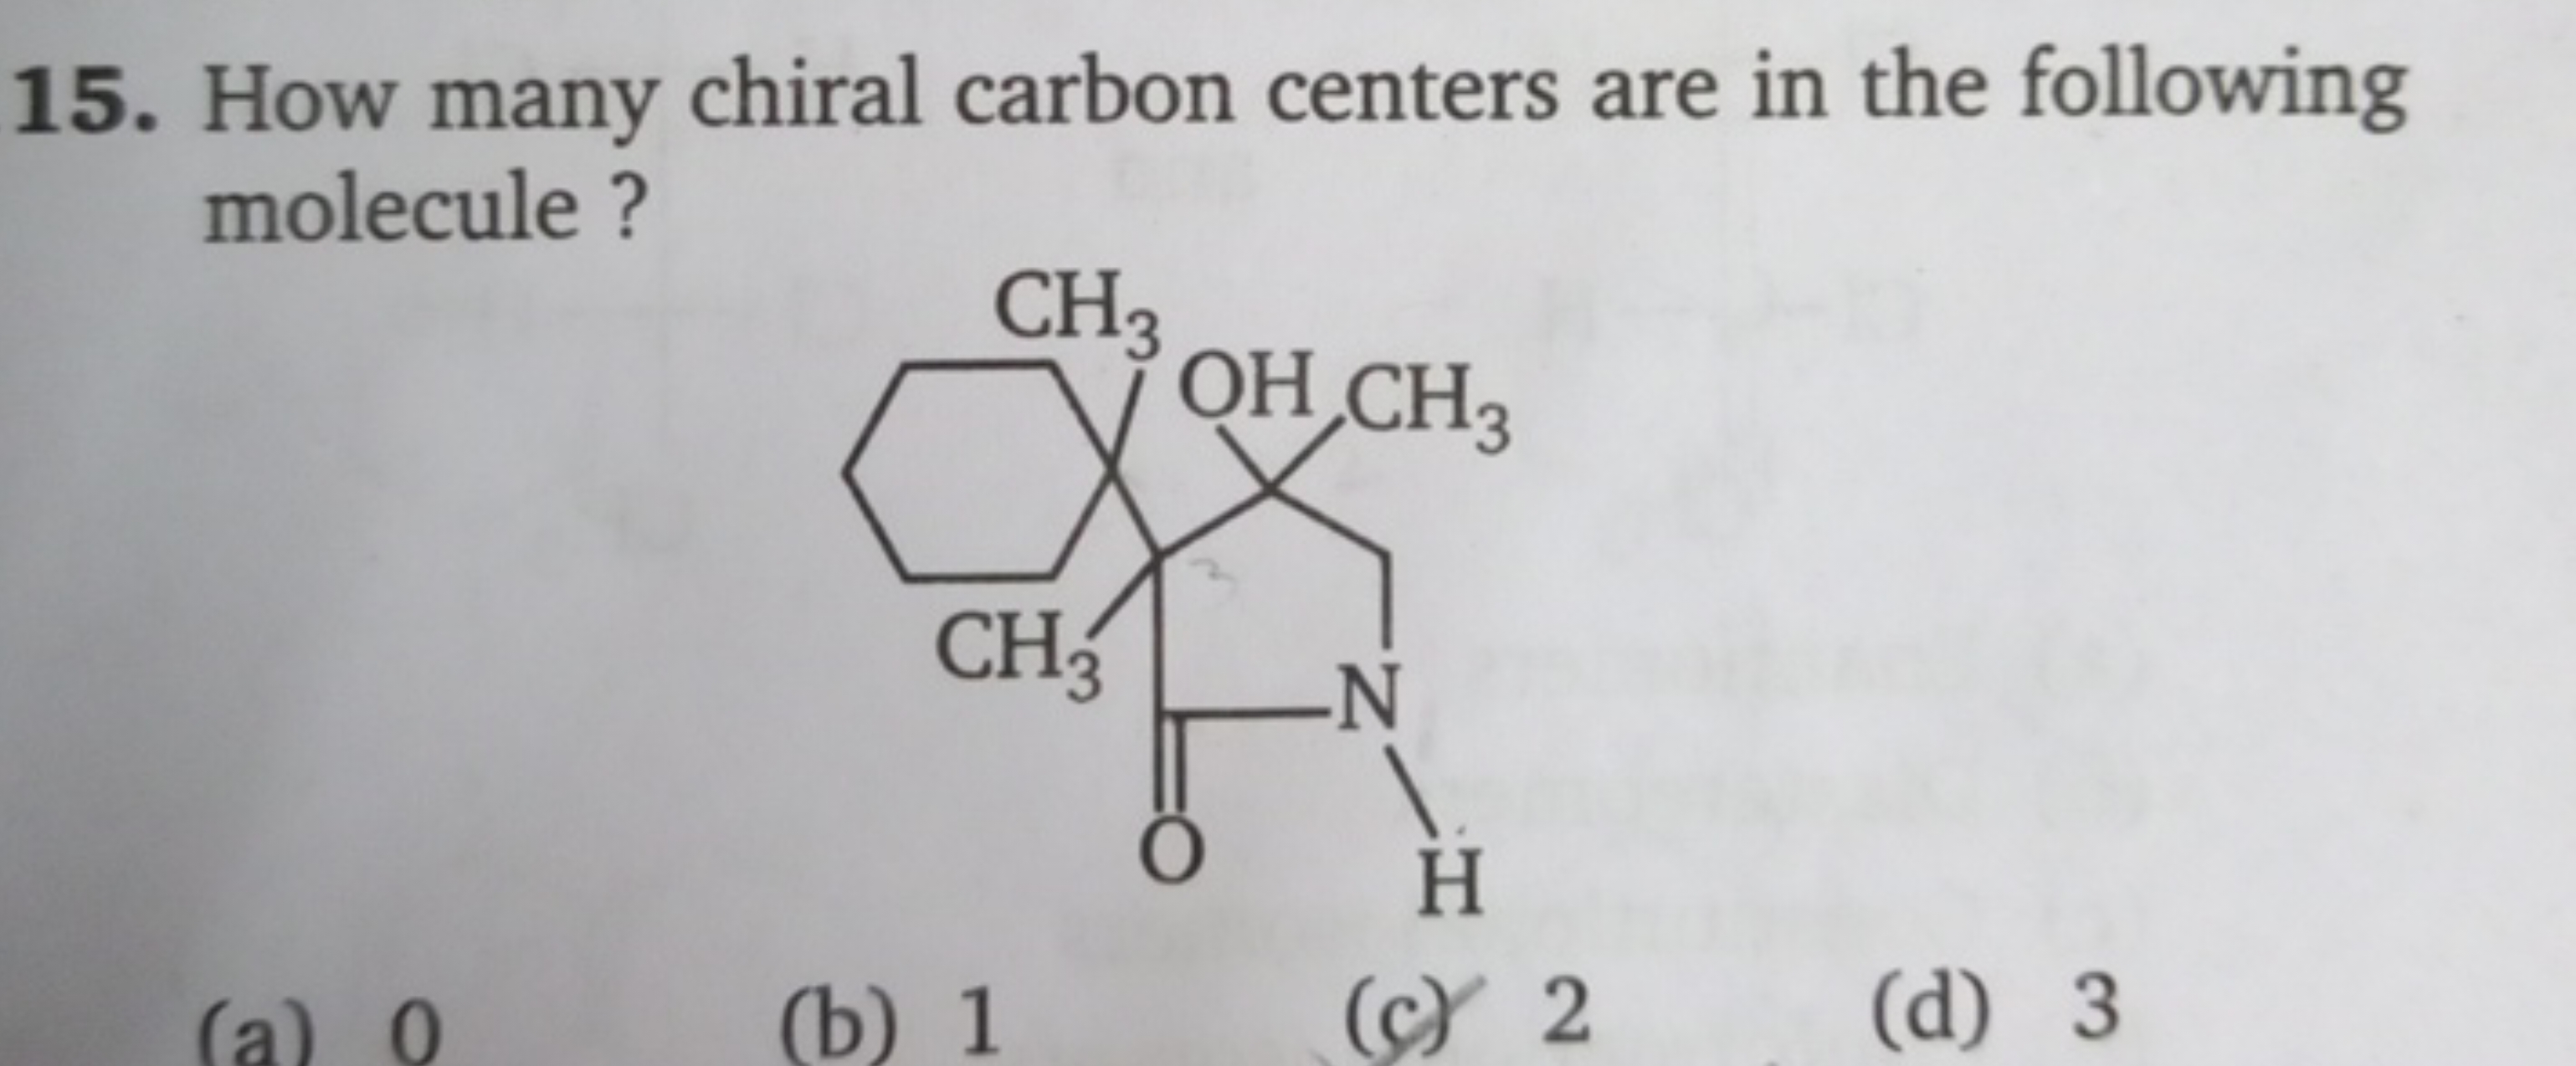 How many chiral carbon centers are in the following molecule? CC1(O)CN